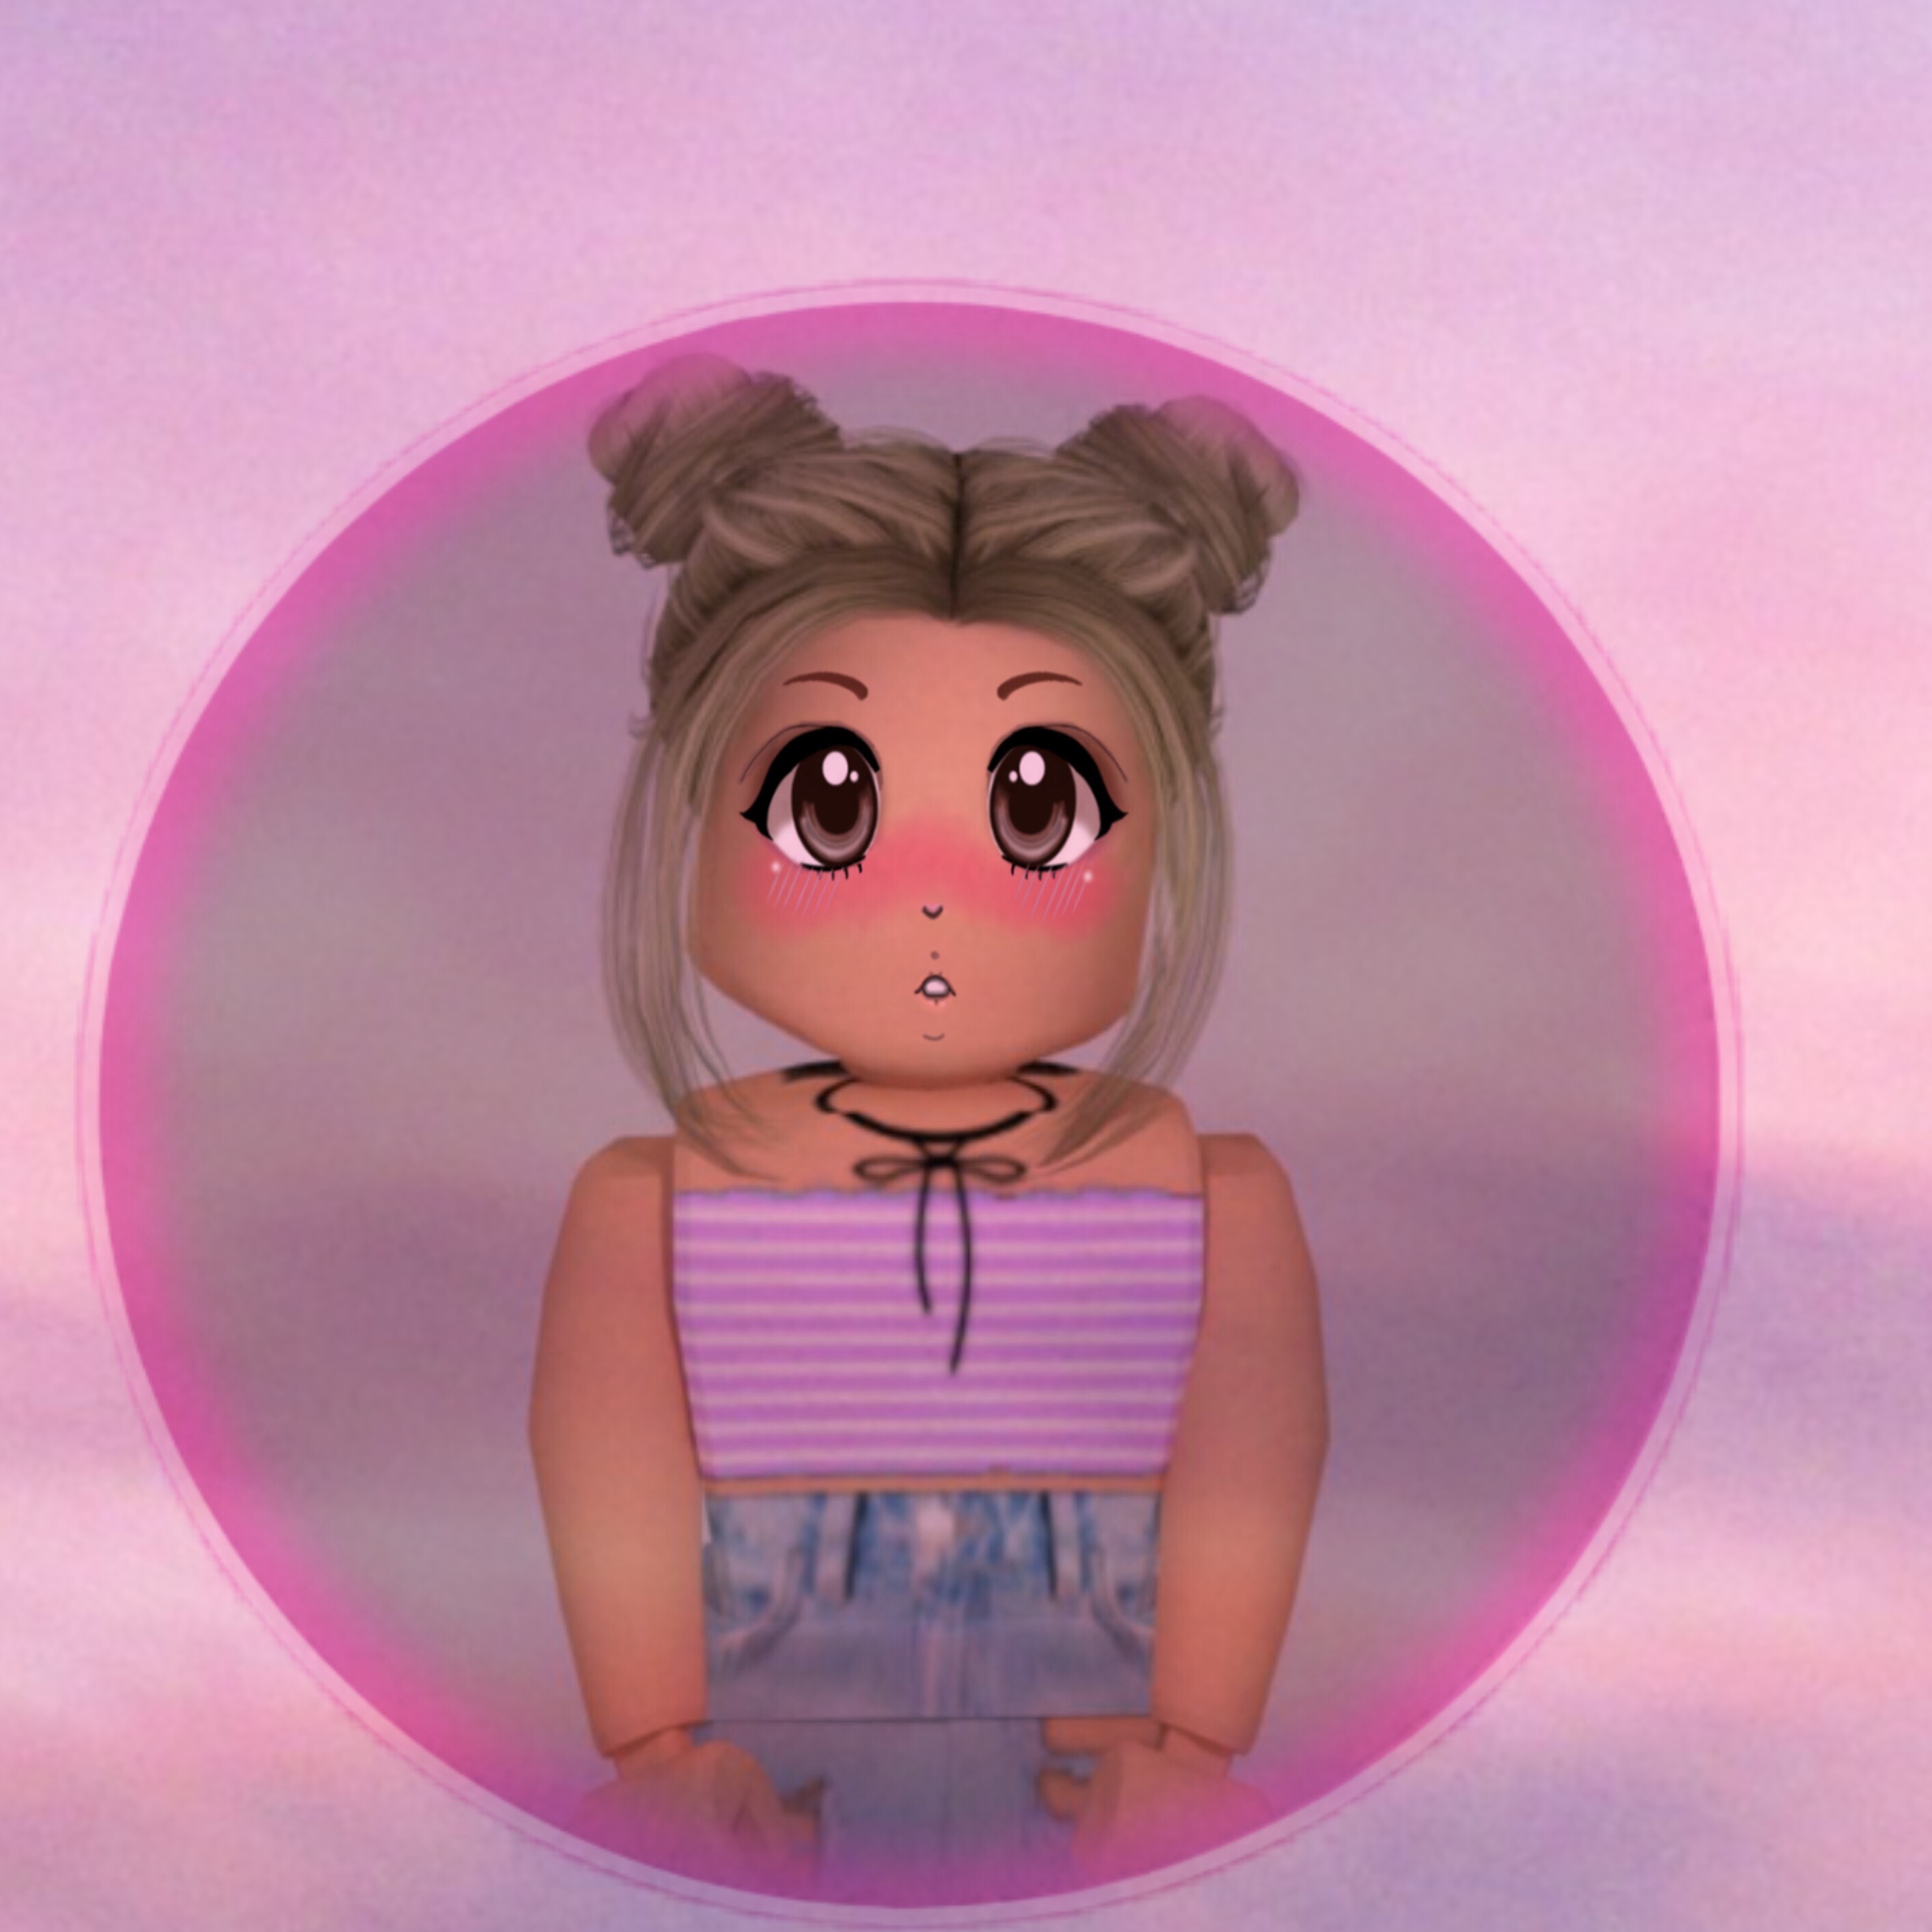 Roblox Gfx Pink Adorable Cute Image By Ivana1995alejo - cute pink aesthetic pastel roblox gfx girl